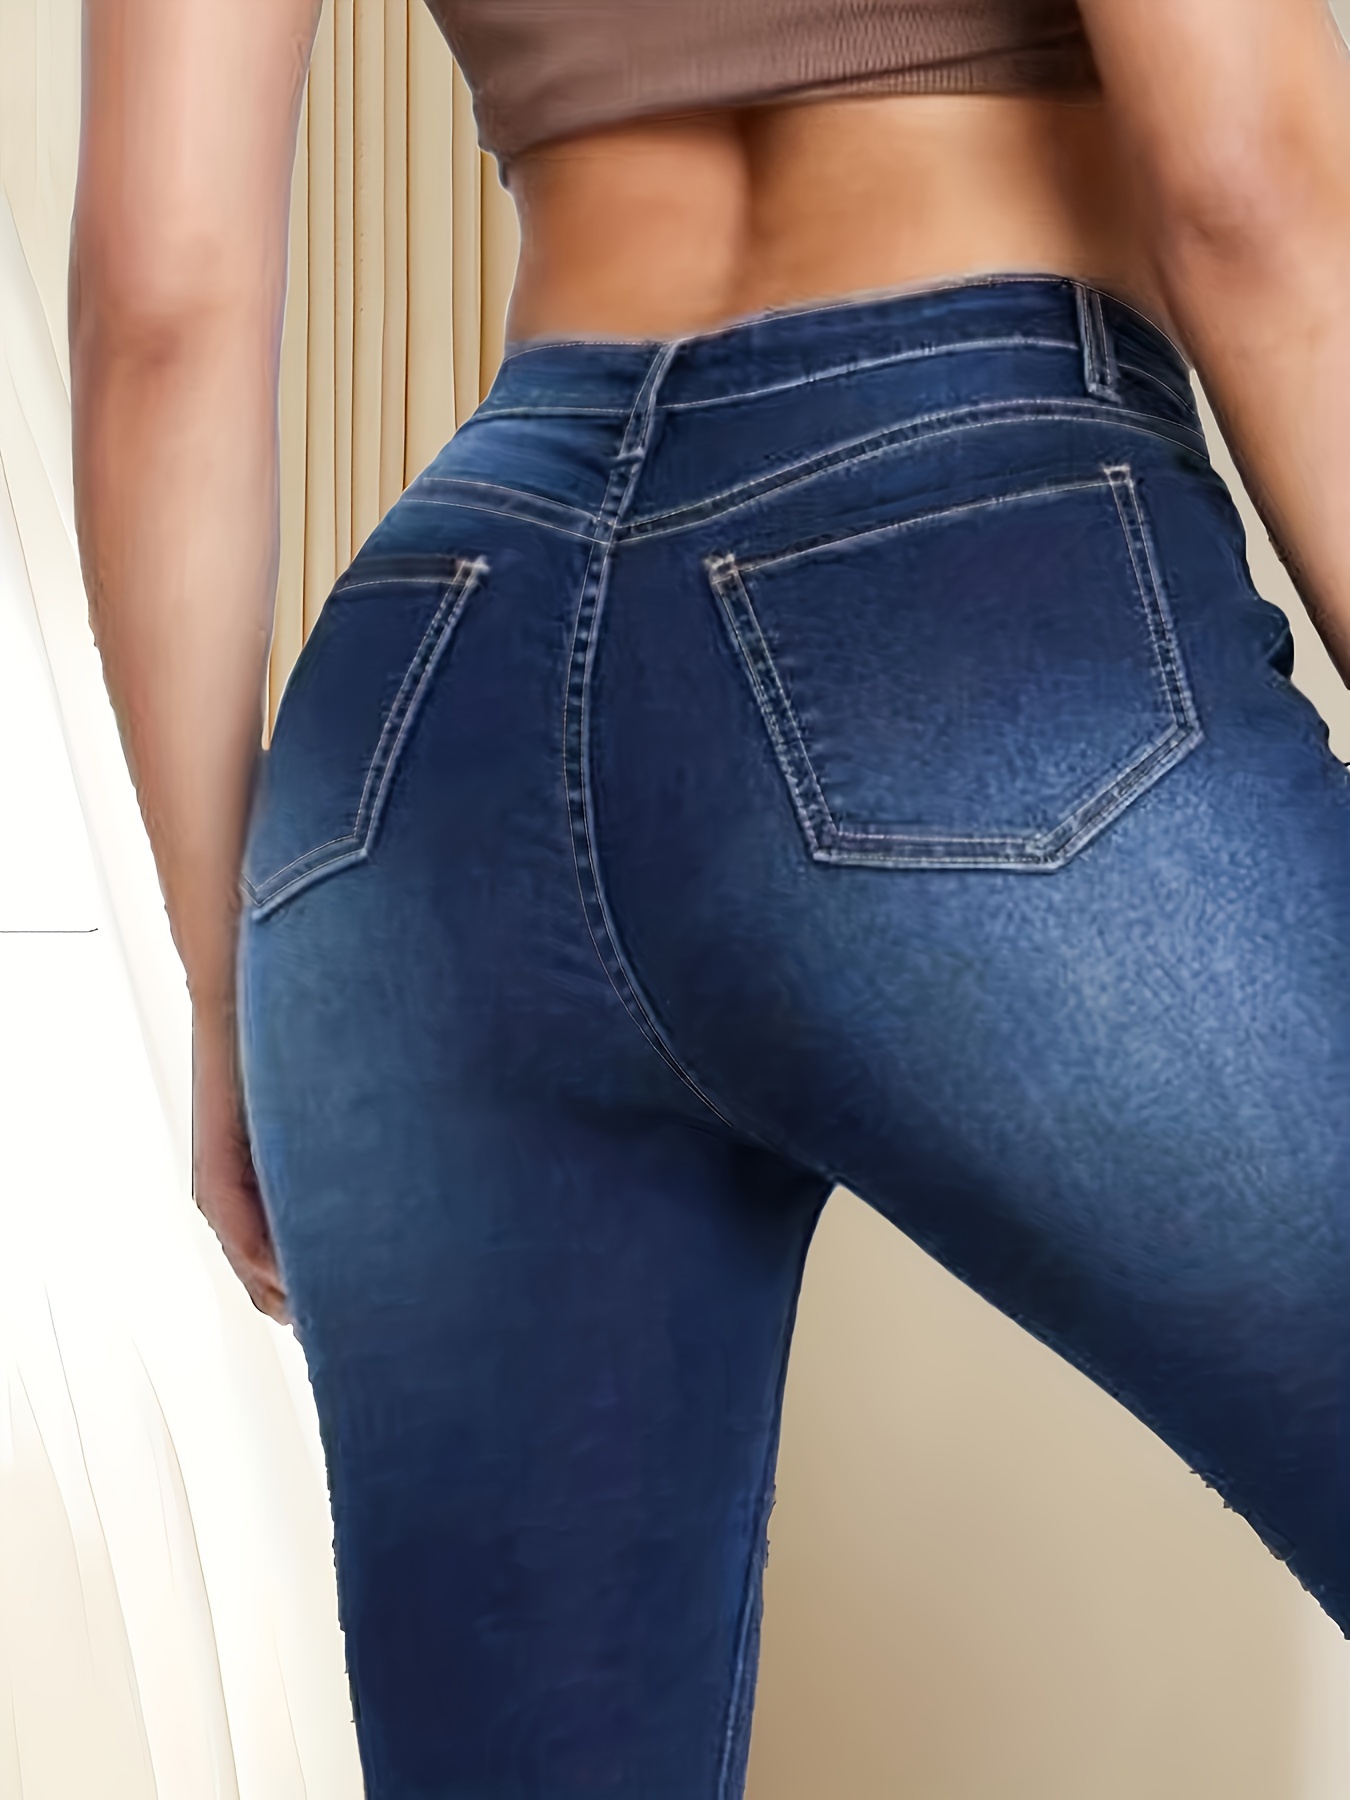 Butt Lifting Skinny Jeans for Women High Waist Slim Fit Stretchy